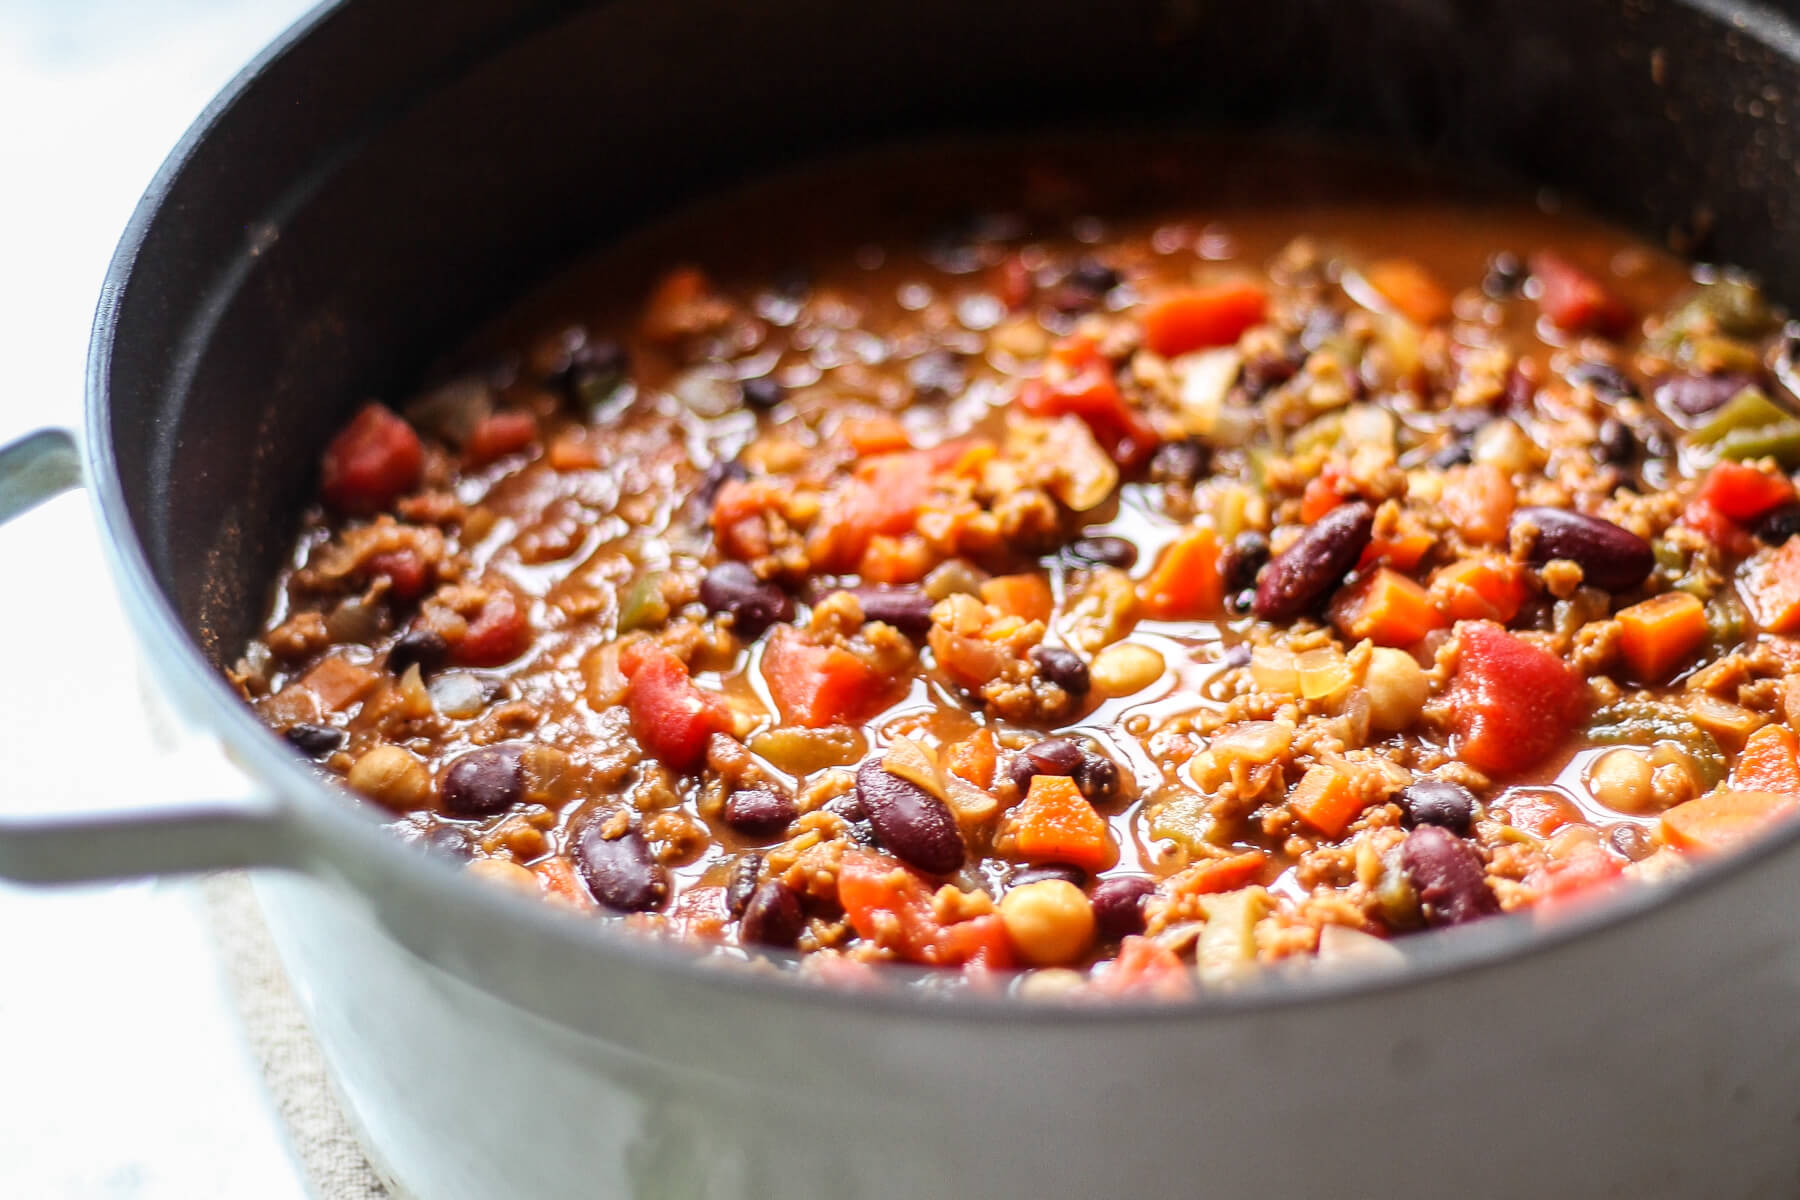 A close up photograph of vegan chili with chickpeas and beans that's finished simmering in a pot.